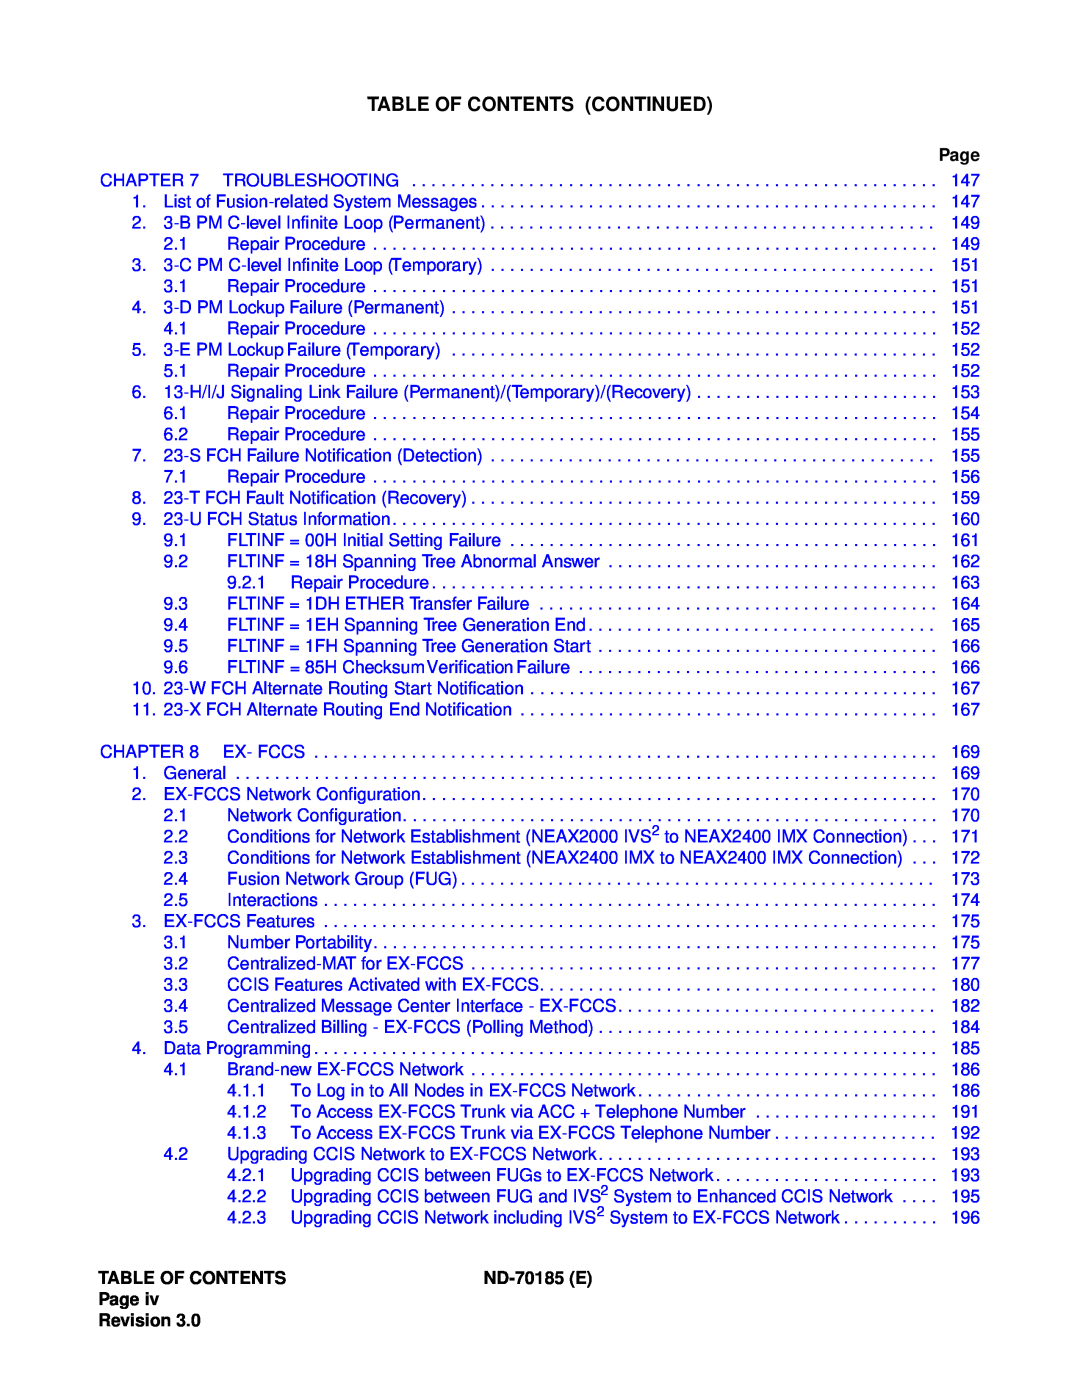 NEC NEAX2400 system manual Table Of Contents Continued, Chapter, ND-70185E, Page Revision 